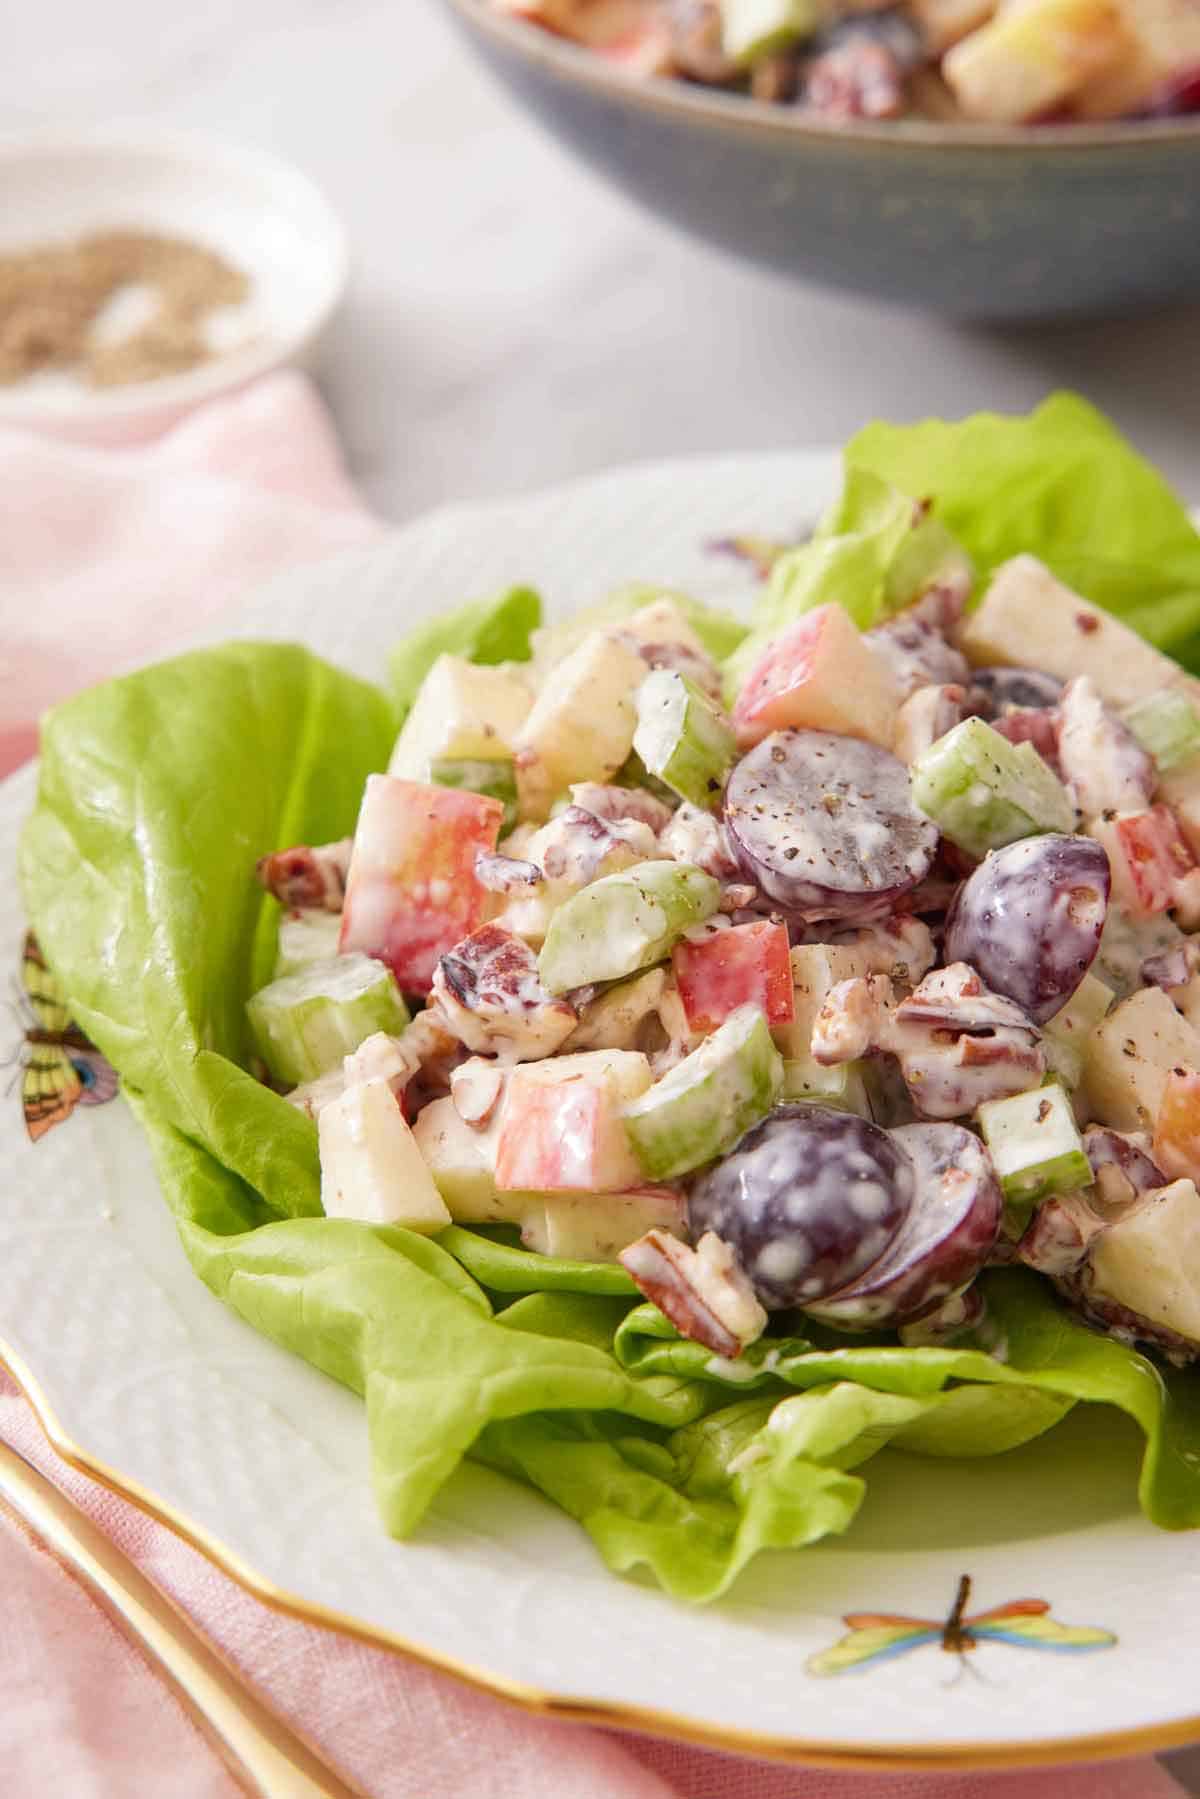 A plate with a serving of Waldorf salad over lettuce.